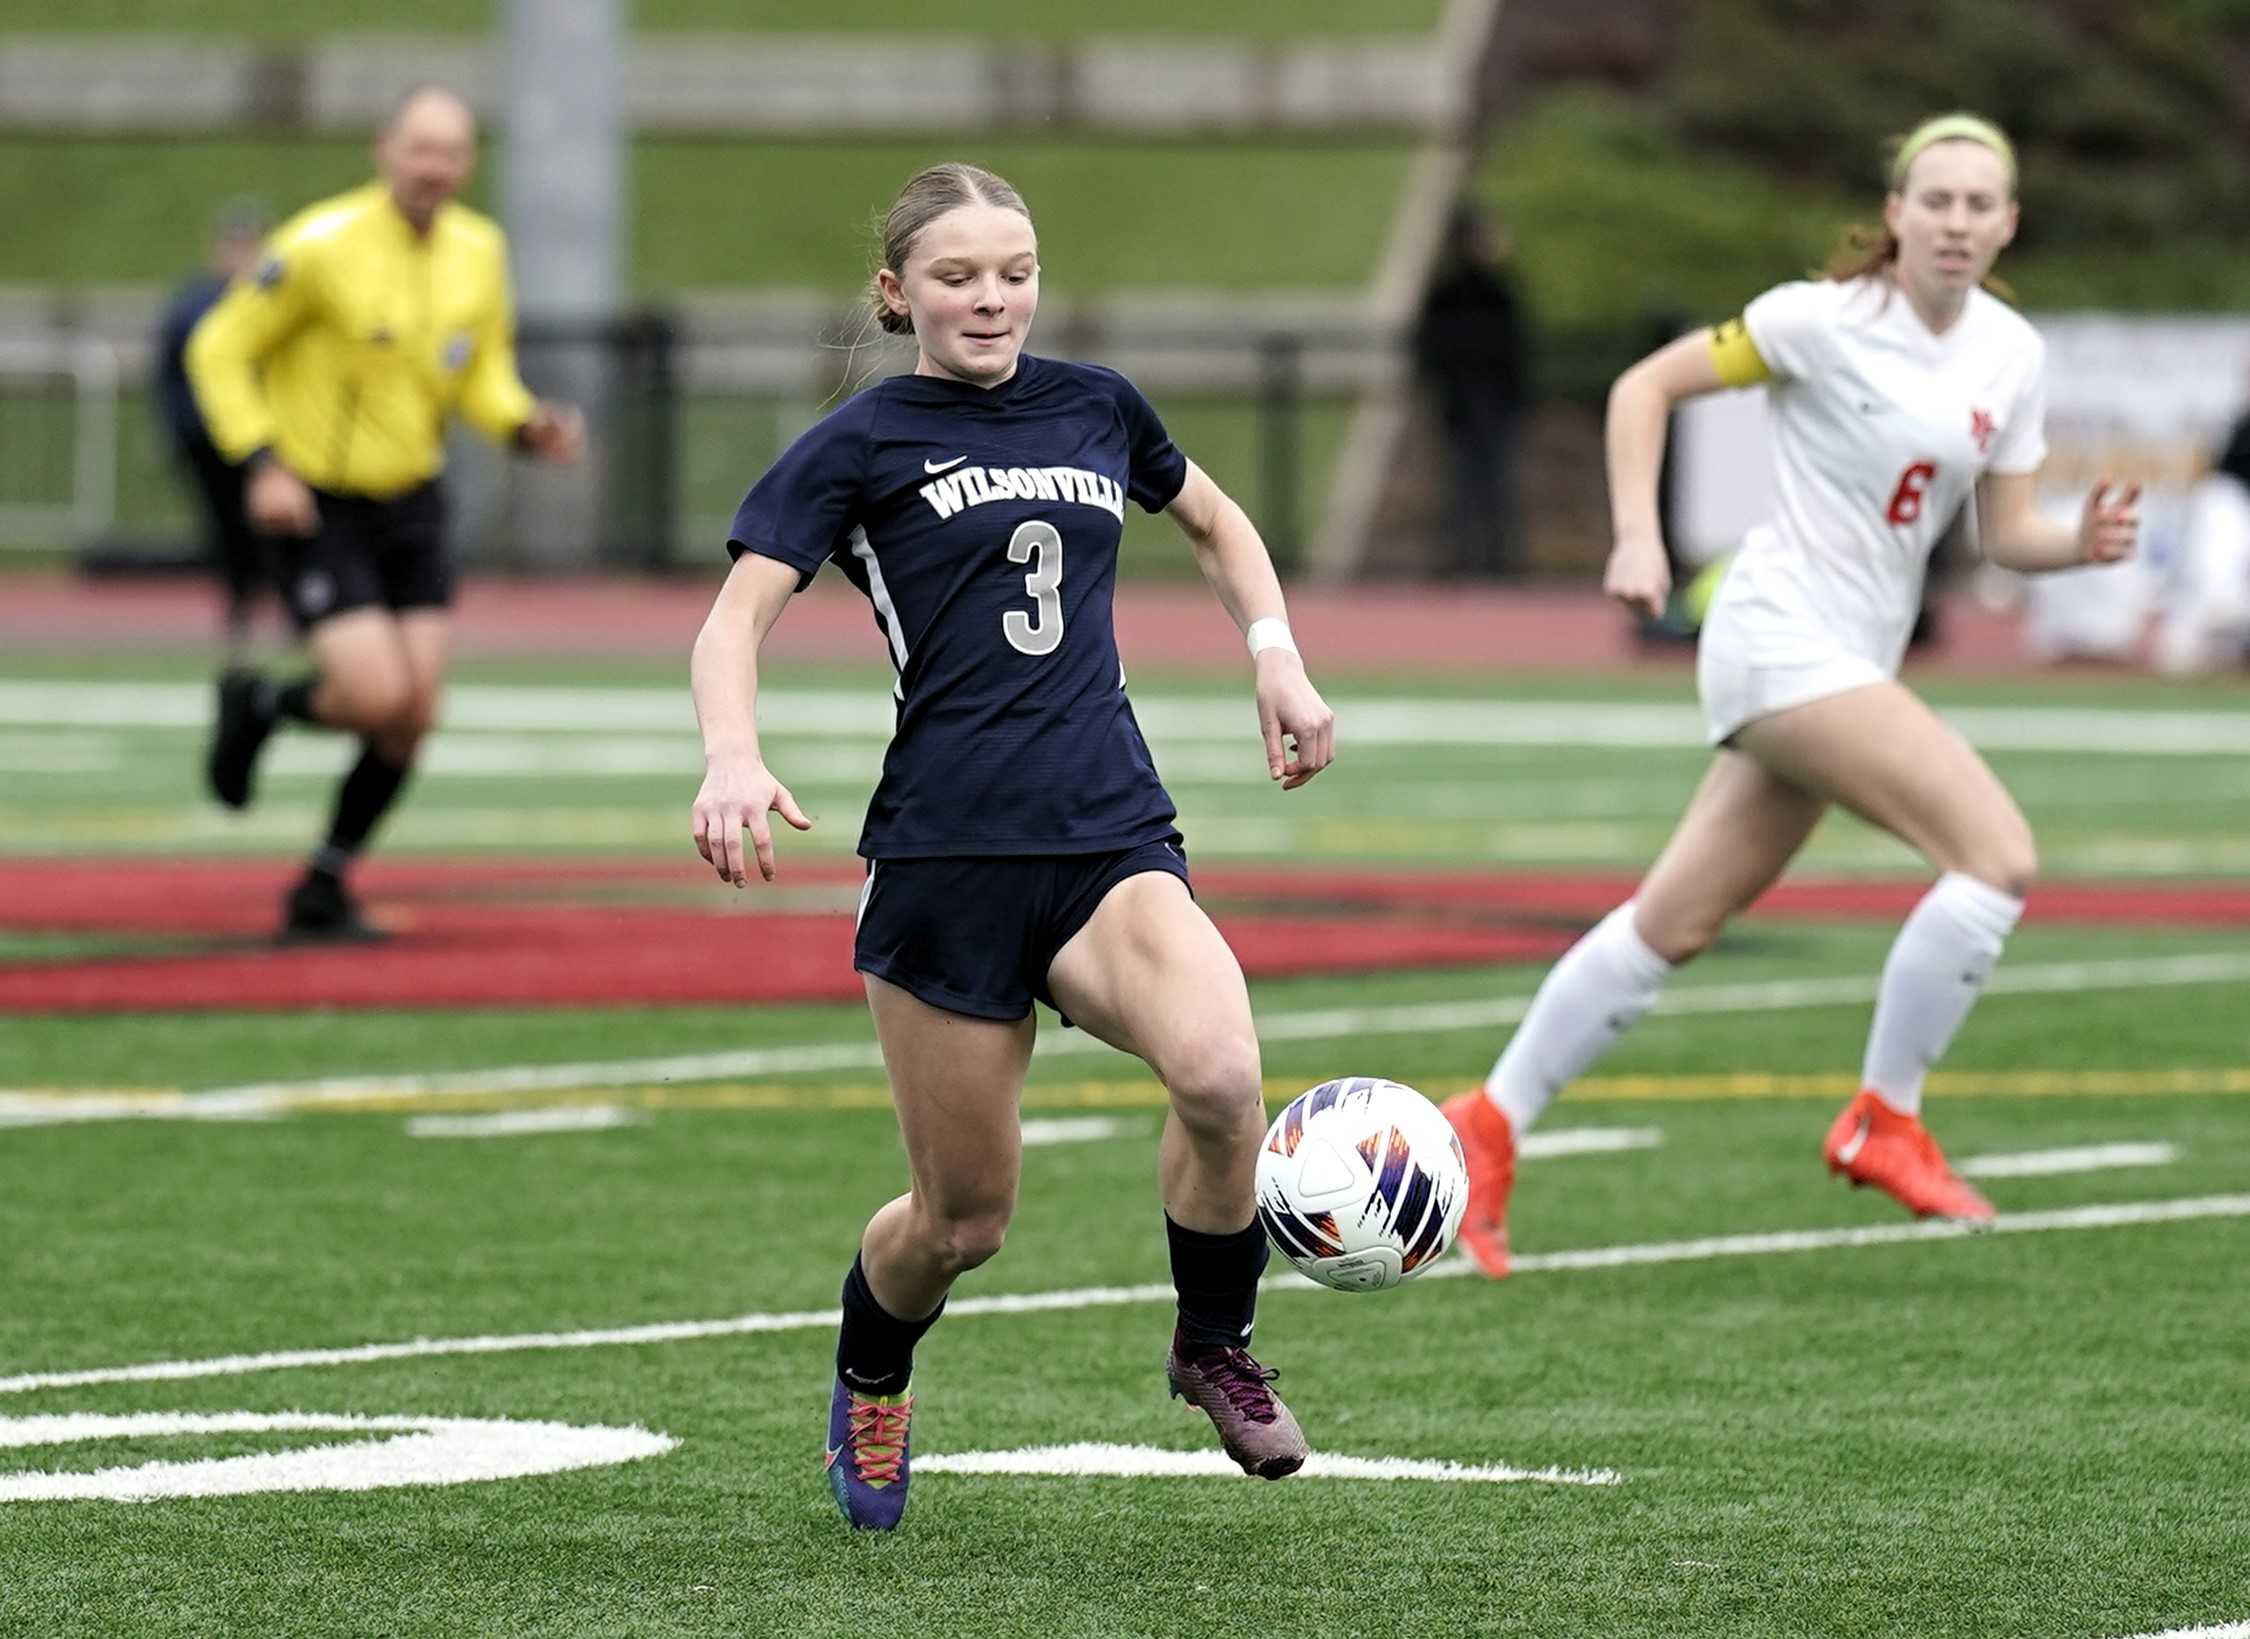 Wilsonville sophomore Camryn Schaan works the ball up the field Saturday against North Eugene. (Photo by Jon Olson)